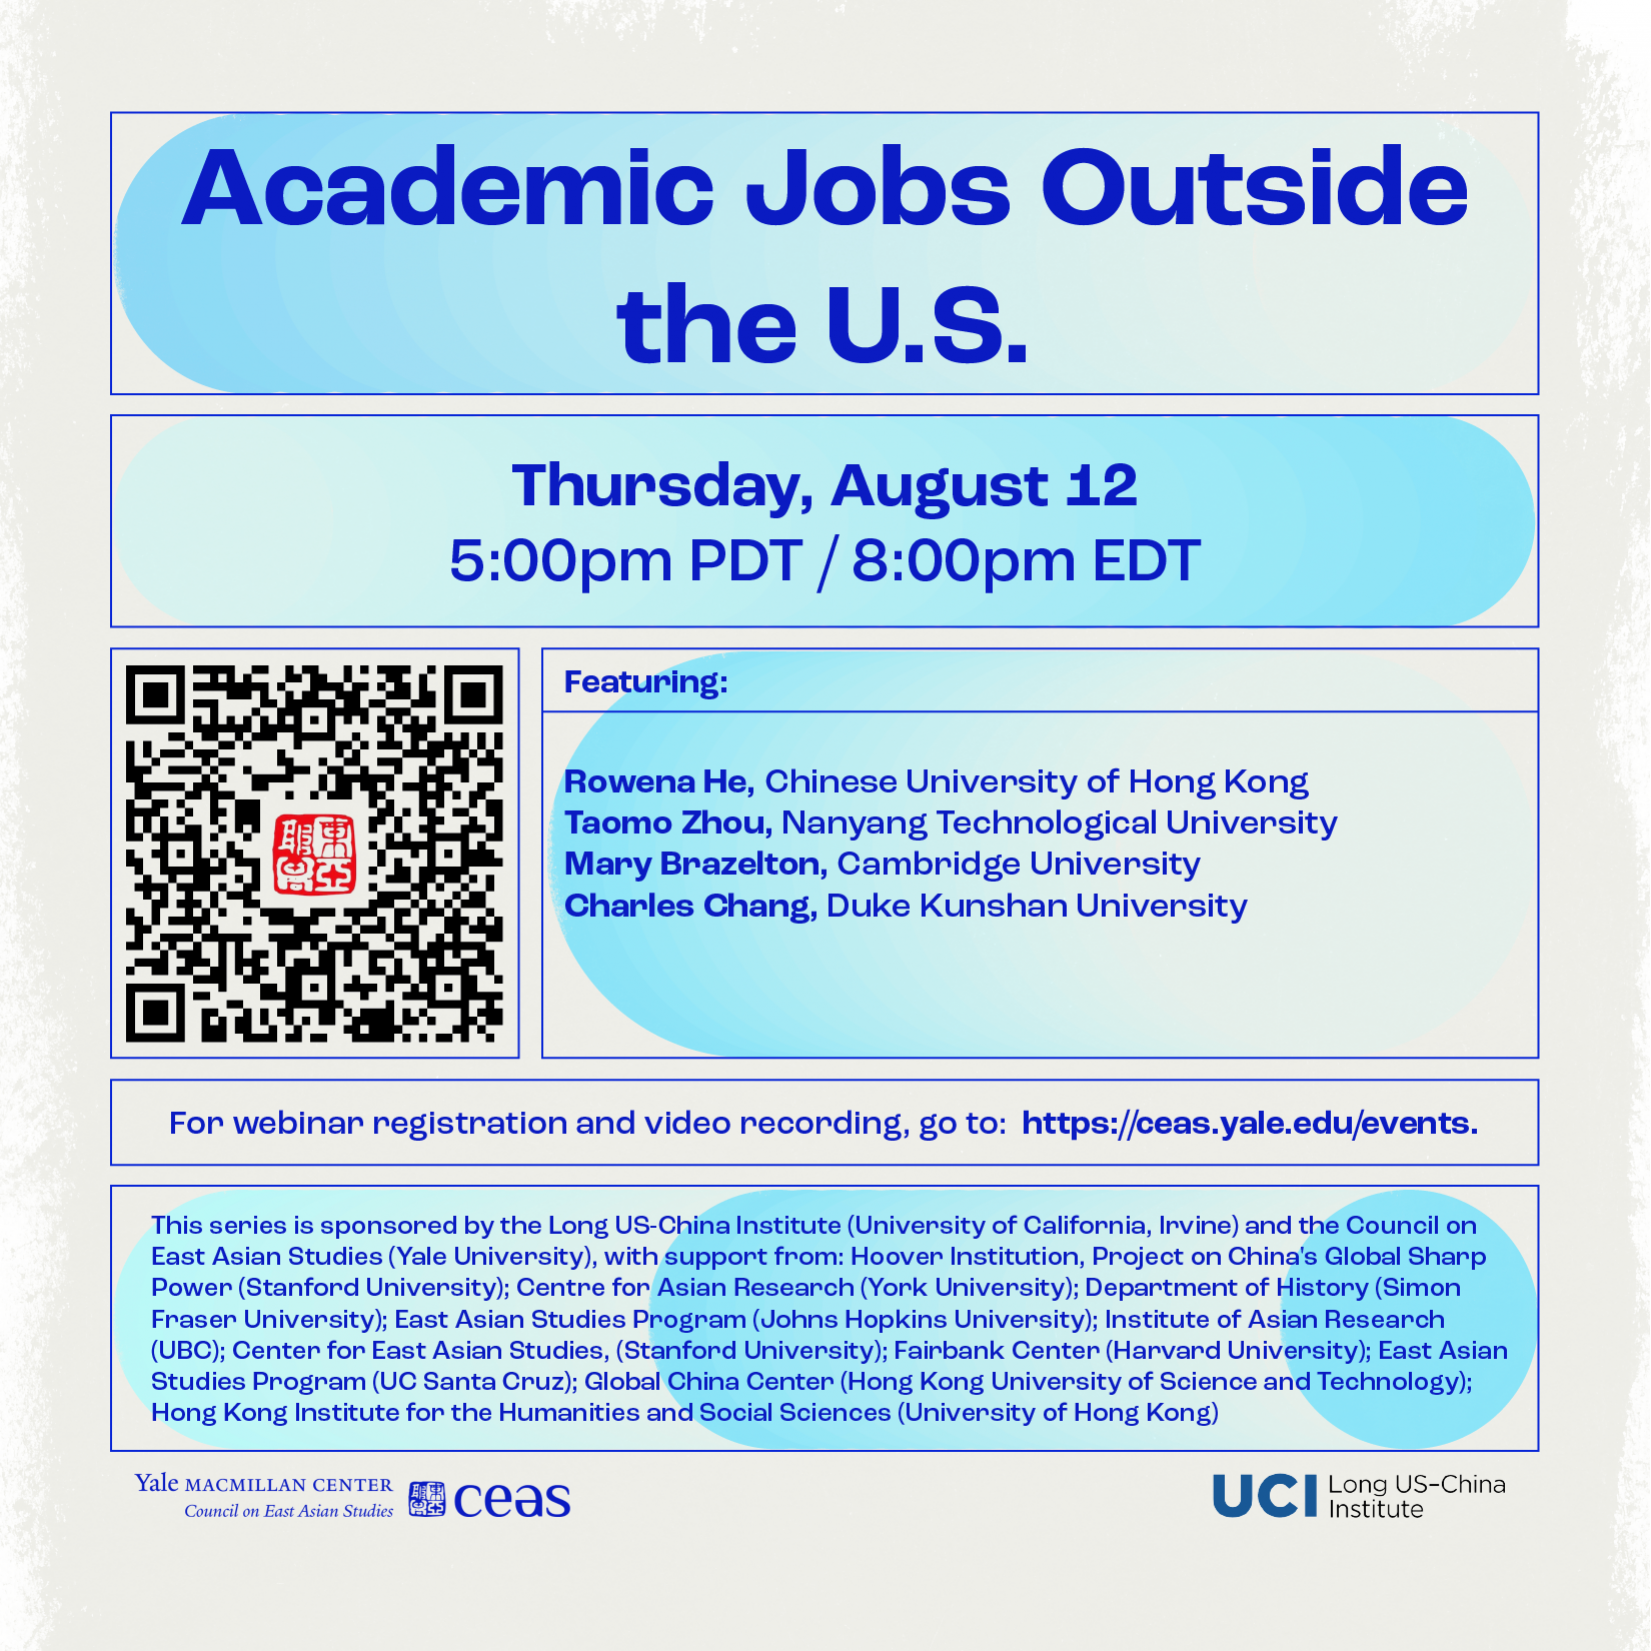 Doing Chinese History (in a New Era) Webinar Series on “Academic Jobs Outside the U.S.” (August 12, 2021)